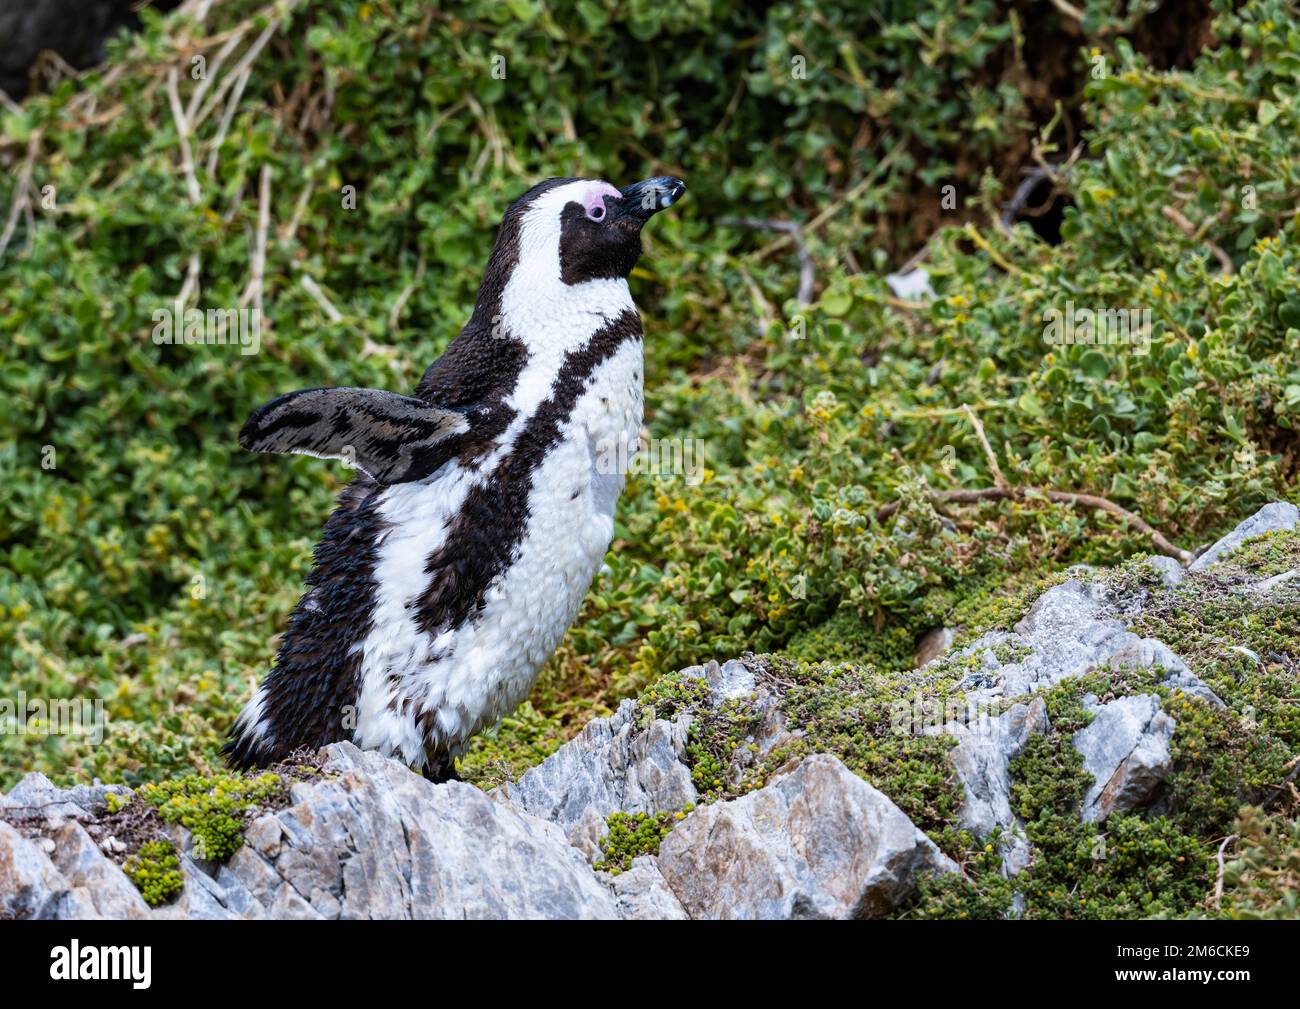 An endangered African Penguin (Spheniscus demersus) walking on rocky outcrop. Western Cape, South Africa. Stock Photo